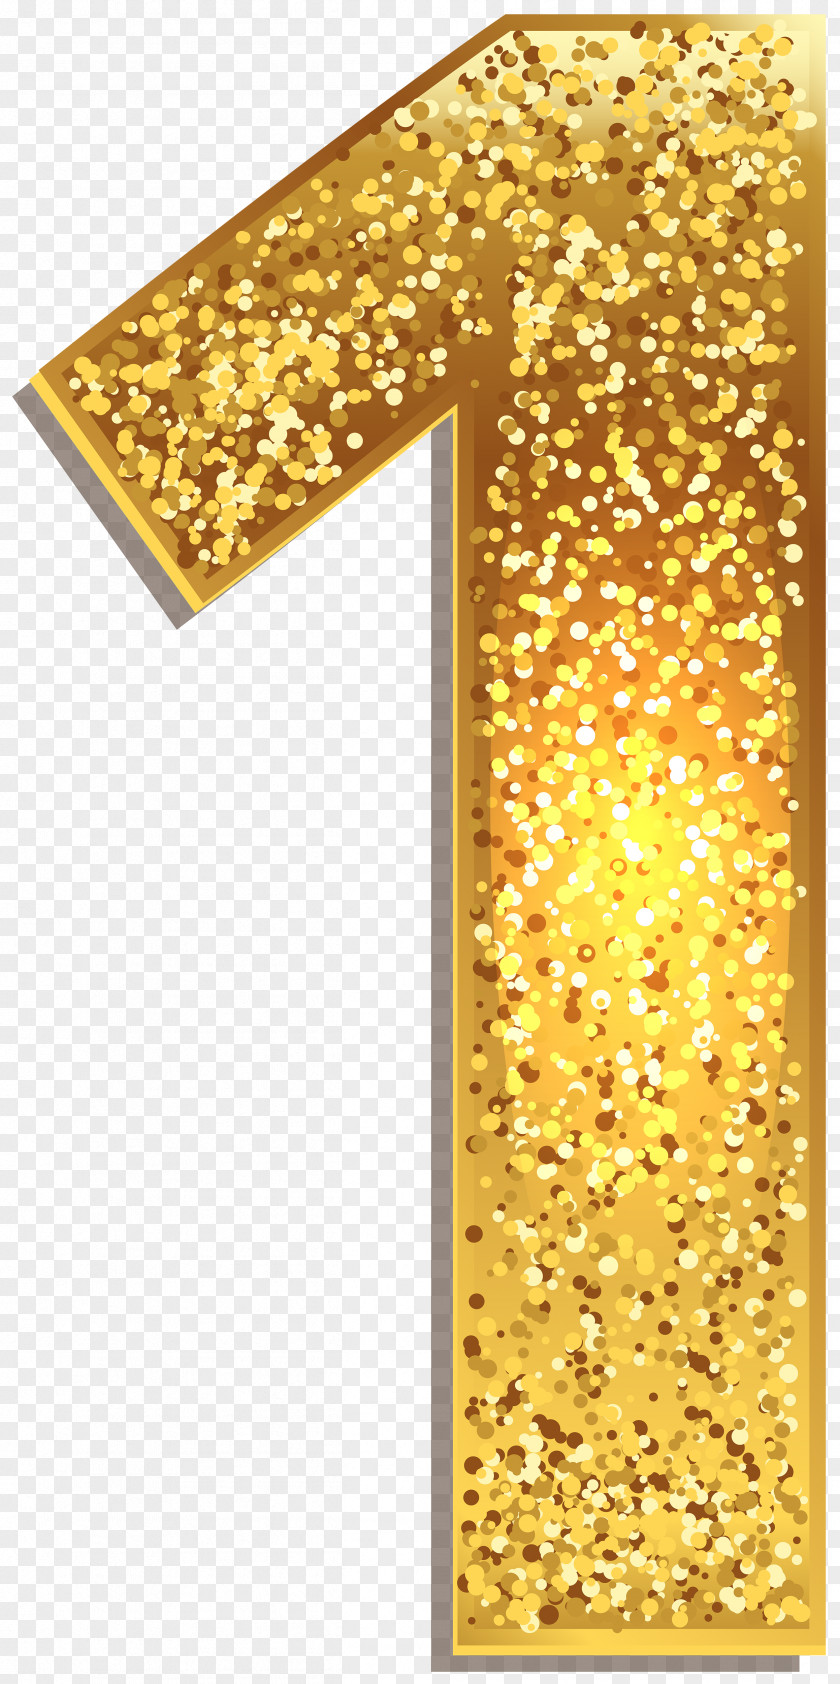 Number One Gold Shining Clip Art Image PNG